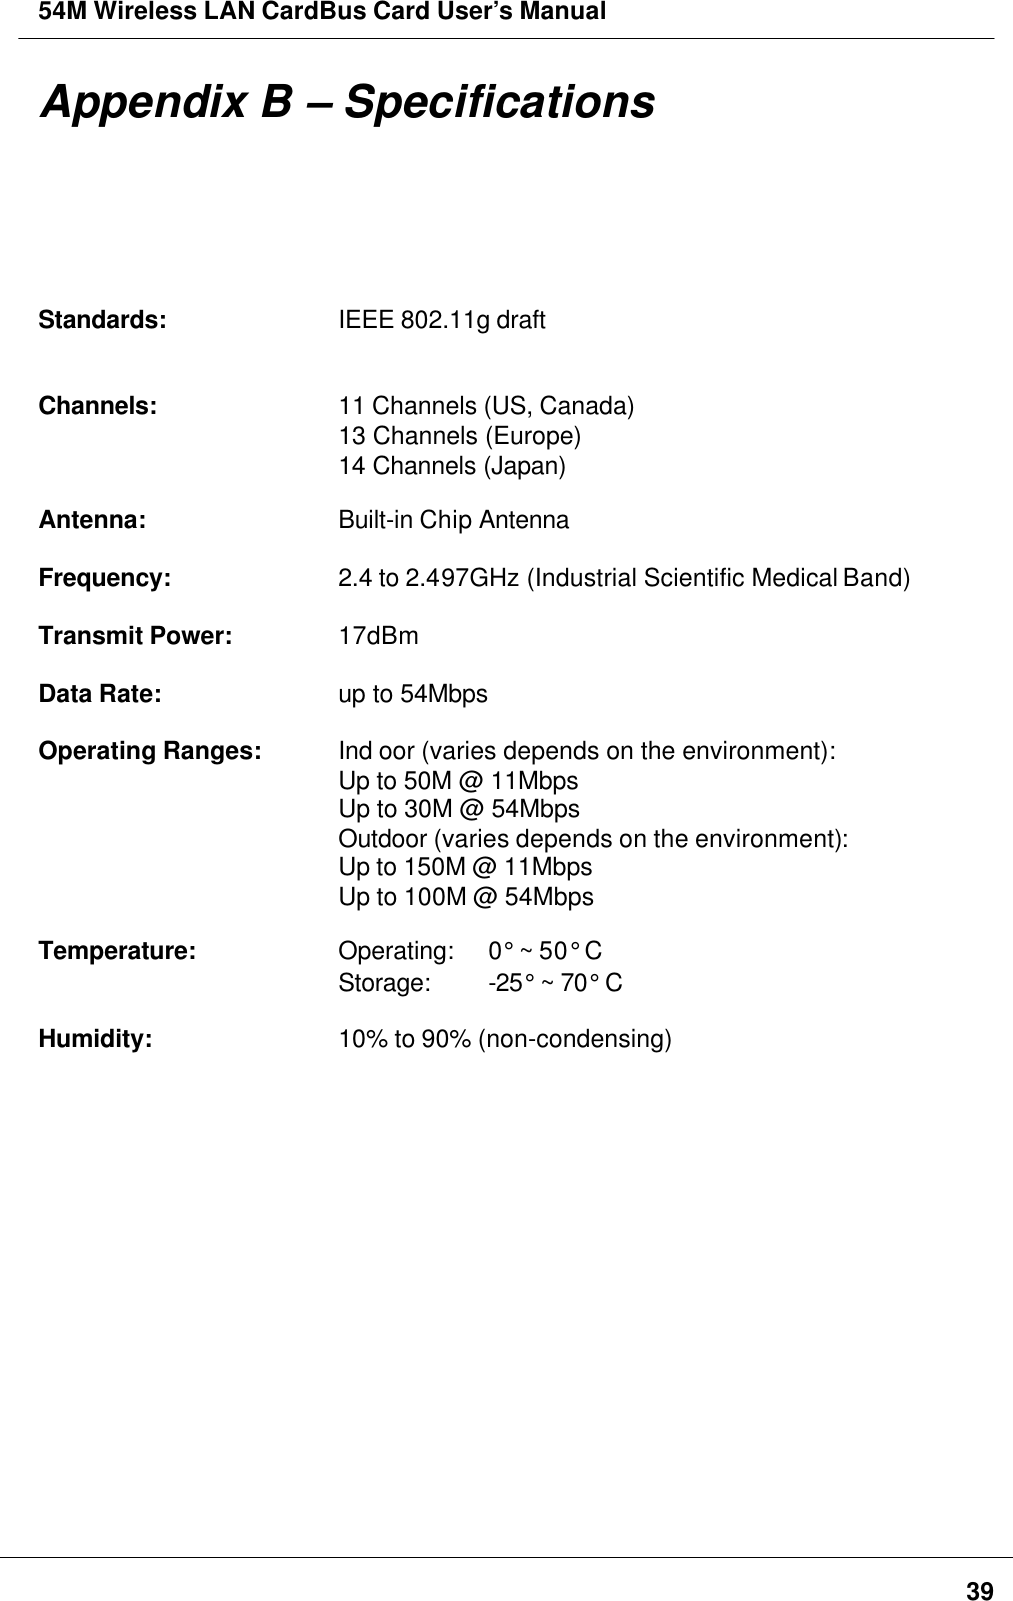 54M Wireless LAN CardBus Card User’s Manual39Appendix B – SpecificationsStandards: IEEE 802.11g draftChannels: 11 Channels (US, Canada)13 Channels (Europe)14 Channels (Japan)Antenna: Built-in Chip AntennaFrequency: 2.4 to 2.497GHz (Industrial Scientific Medical Band)Transmit Power:17dBmData Rate: up to 54MbpsOperating Ranges: Ind oor (varies depends on the environment):Up to 50M @ 11MbpsUp to 30M @ 54MbpsOutdoor (varies depends on the environment):Up to 150M @ 11MbpsUp to 100M @ 54MbpsTemperature: Operating:  0° ~ 50° CStorage:  -25° ~ 70° CHumidity: 10% to 90% (non-condensing)